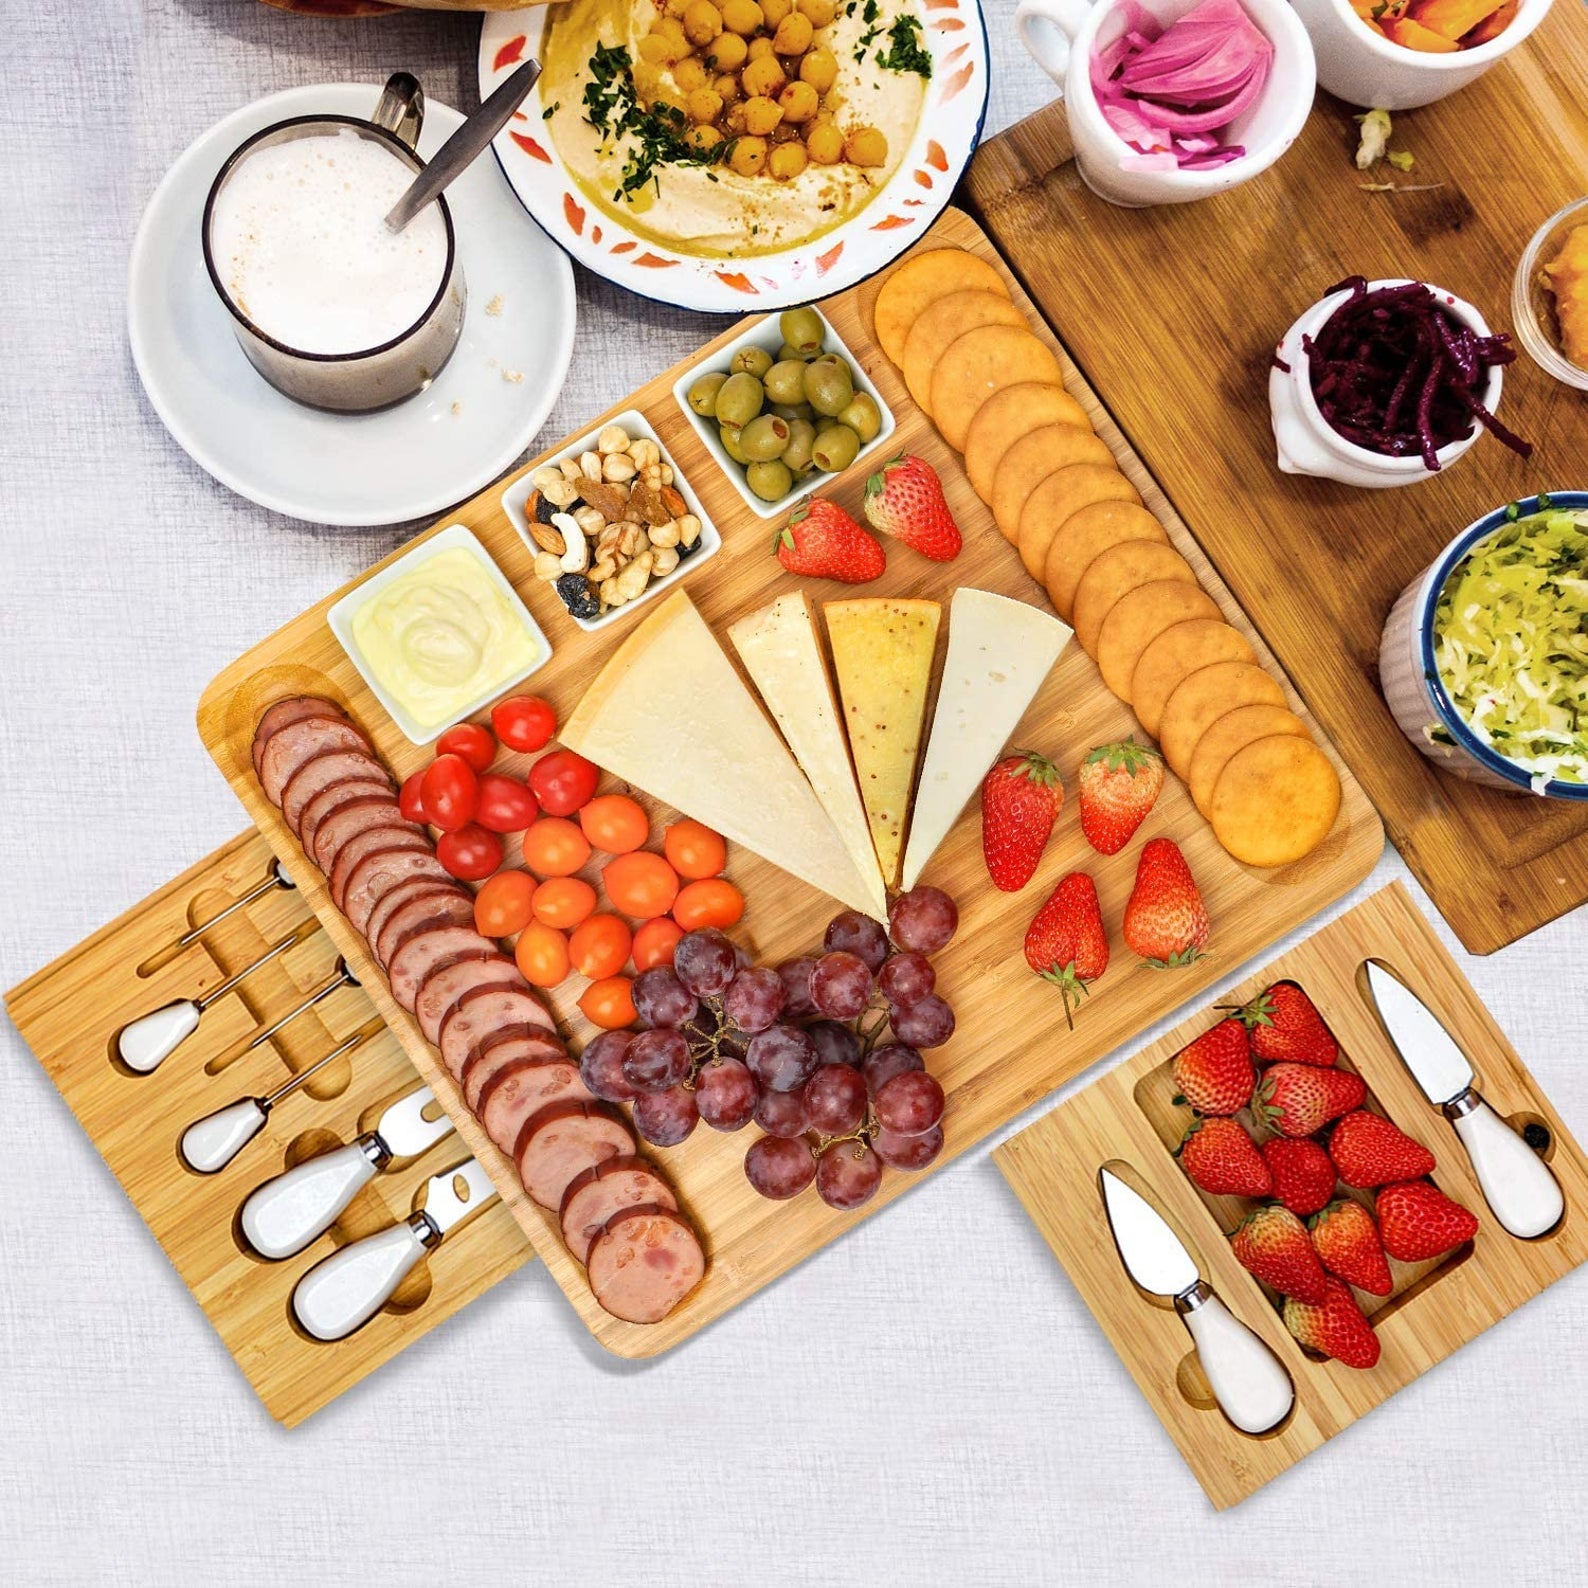 SMIRLY Cheese Board and Knife Set - Extra Large Charcuterie Board